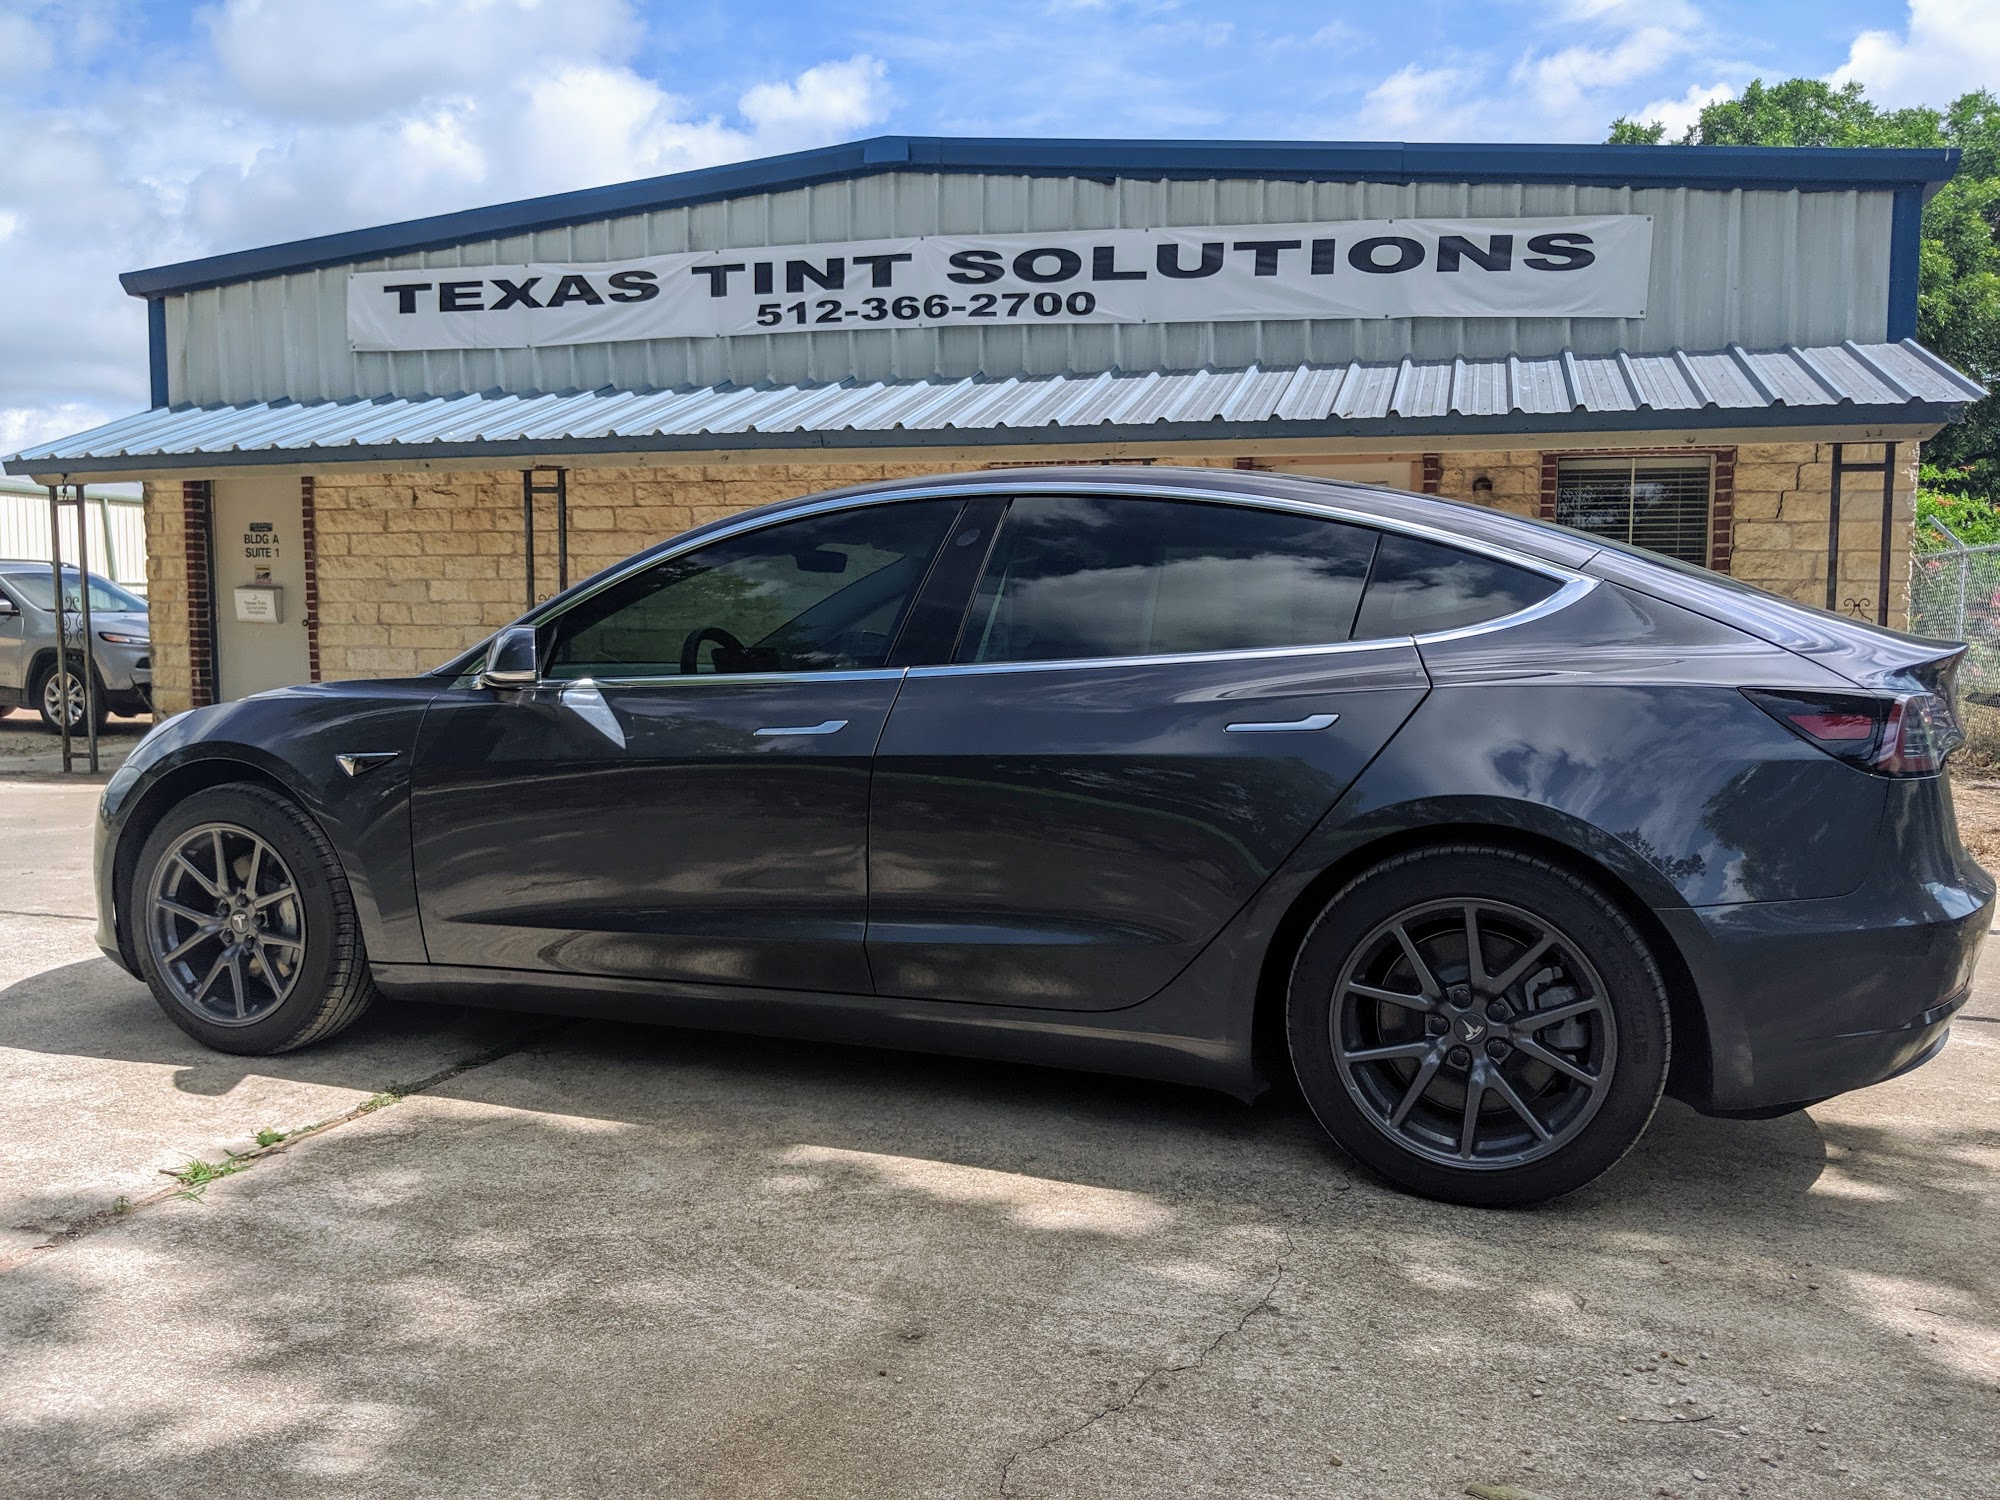 Texas Tint Solutions